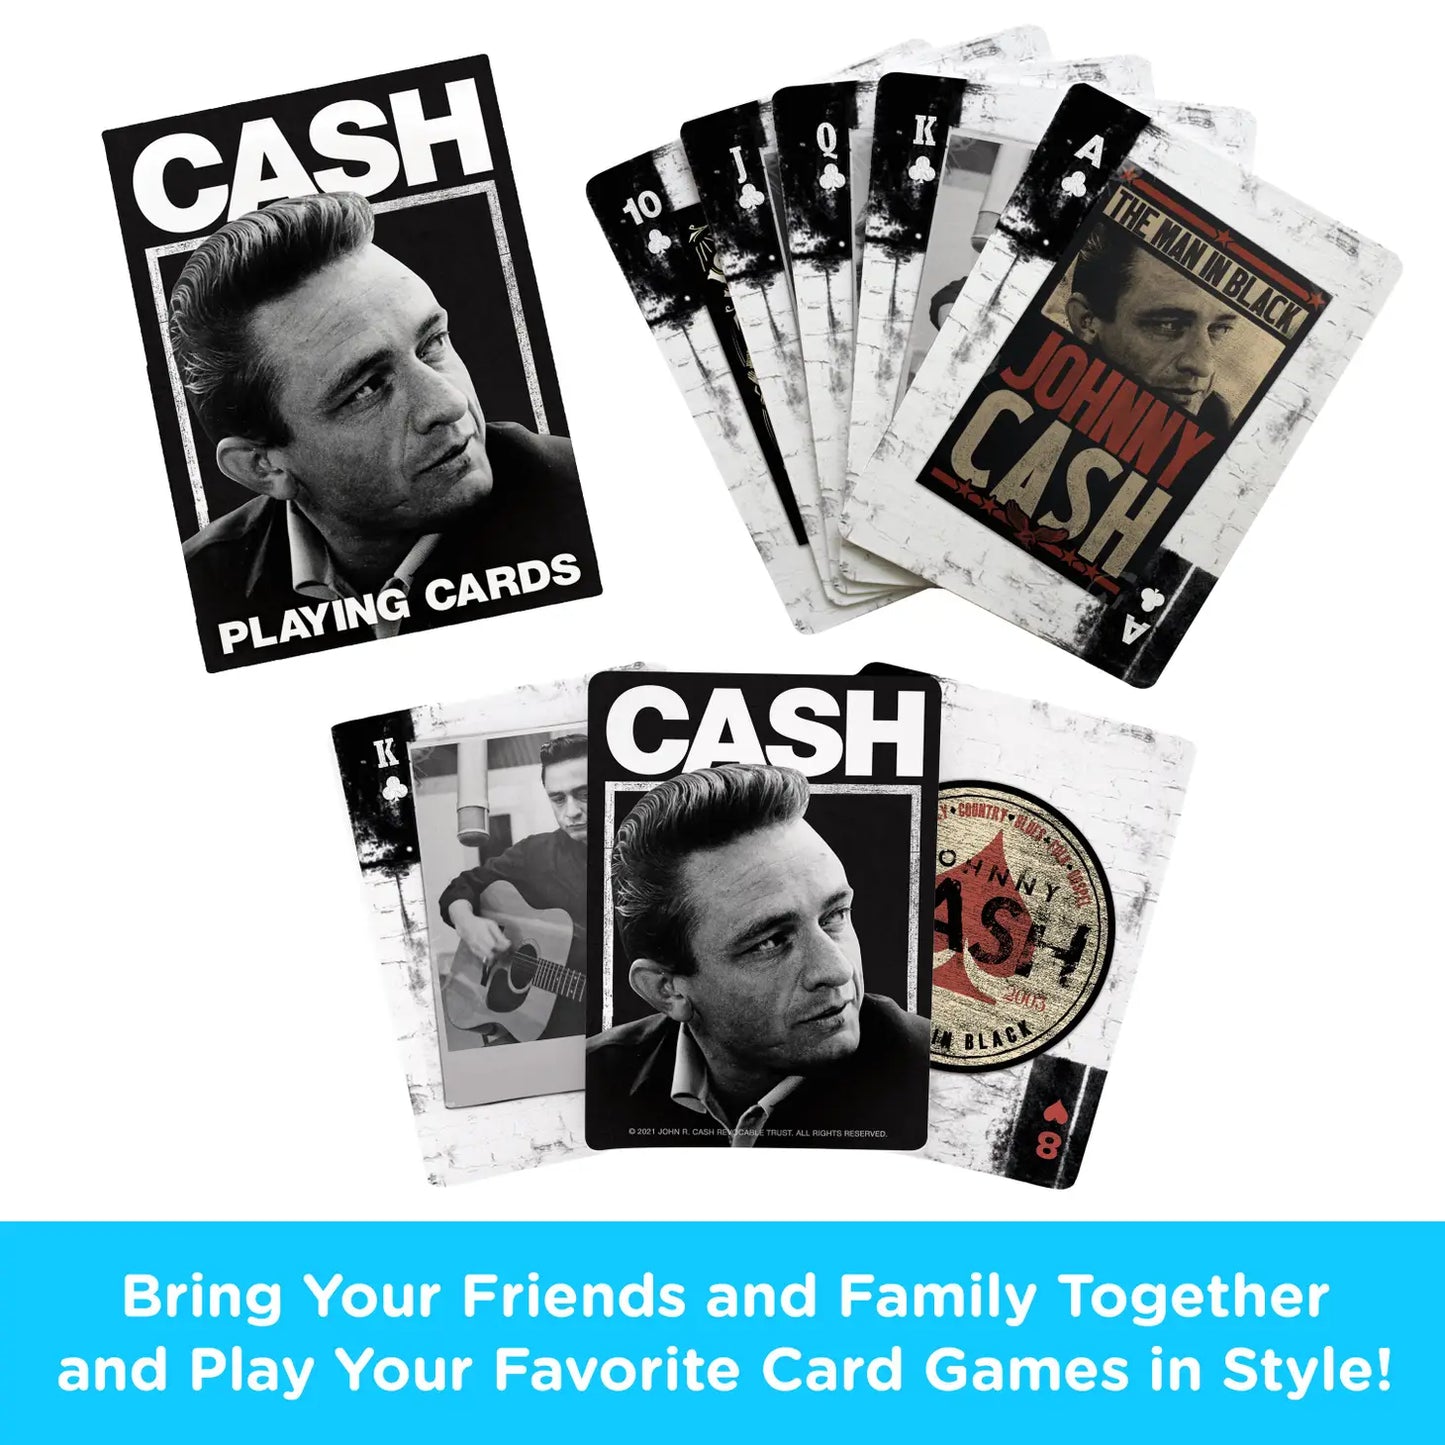 Johnny Cash Playing Cards by Aquarius - Celebrate the Music Legend